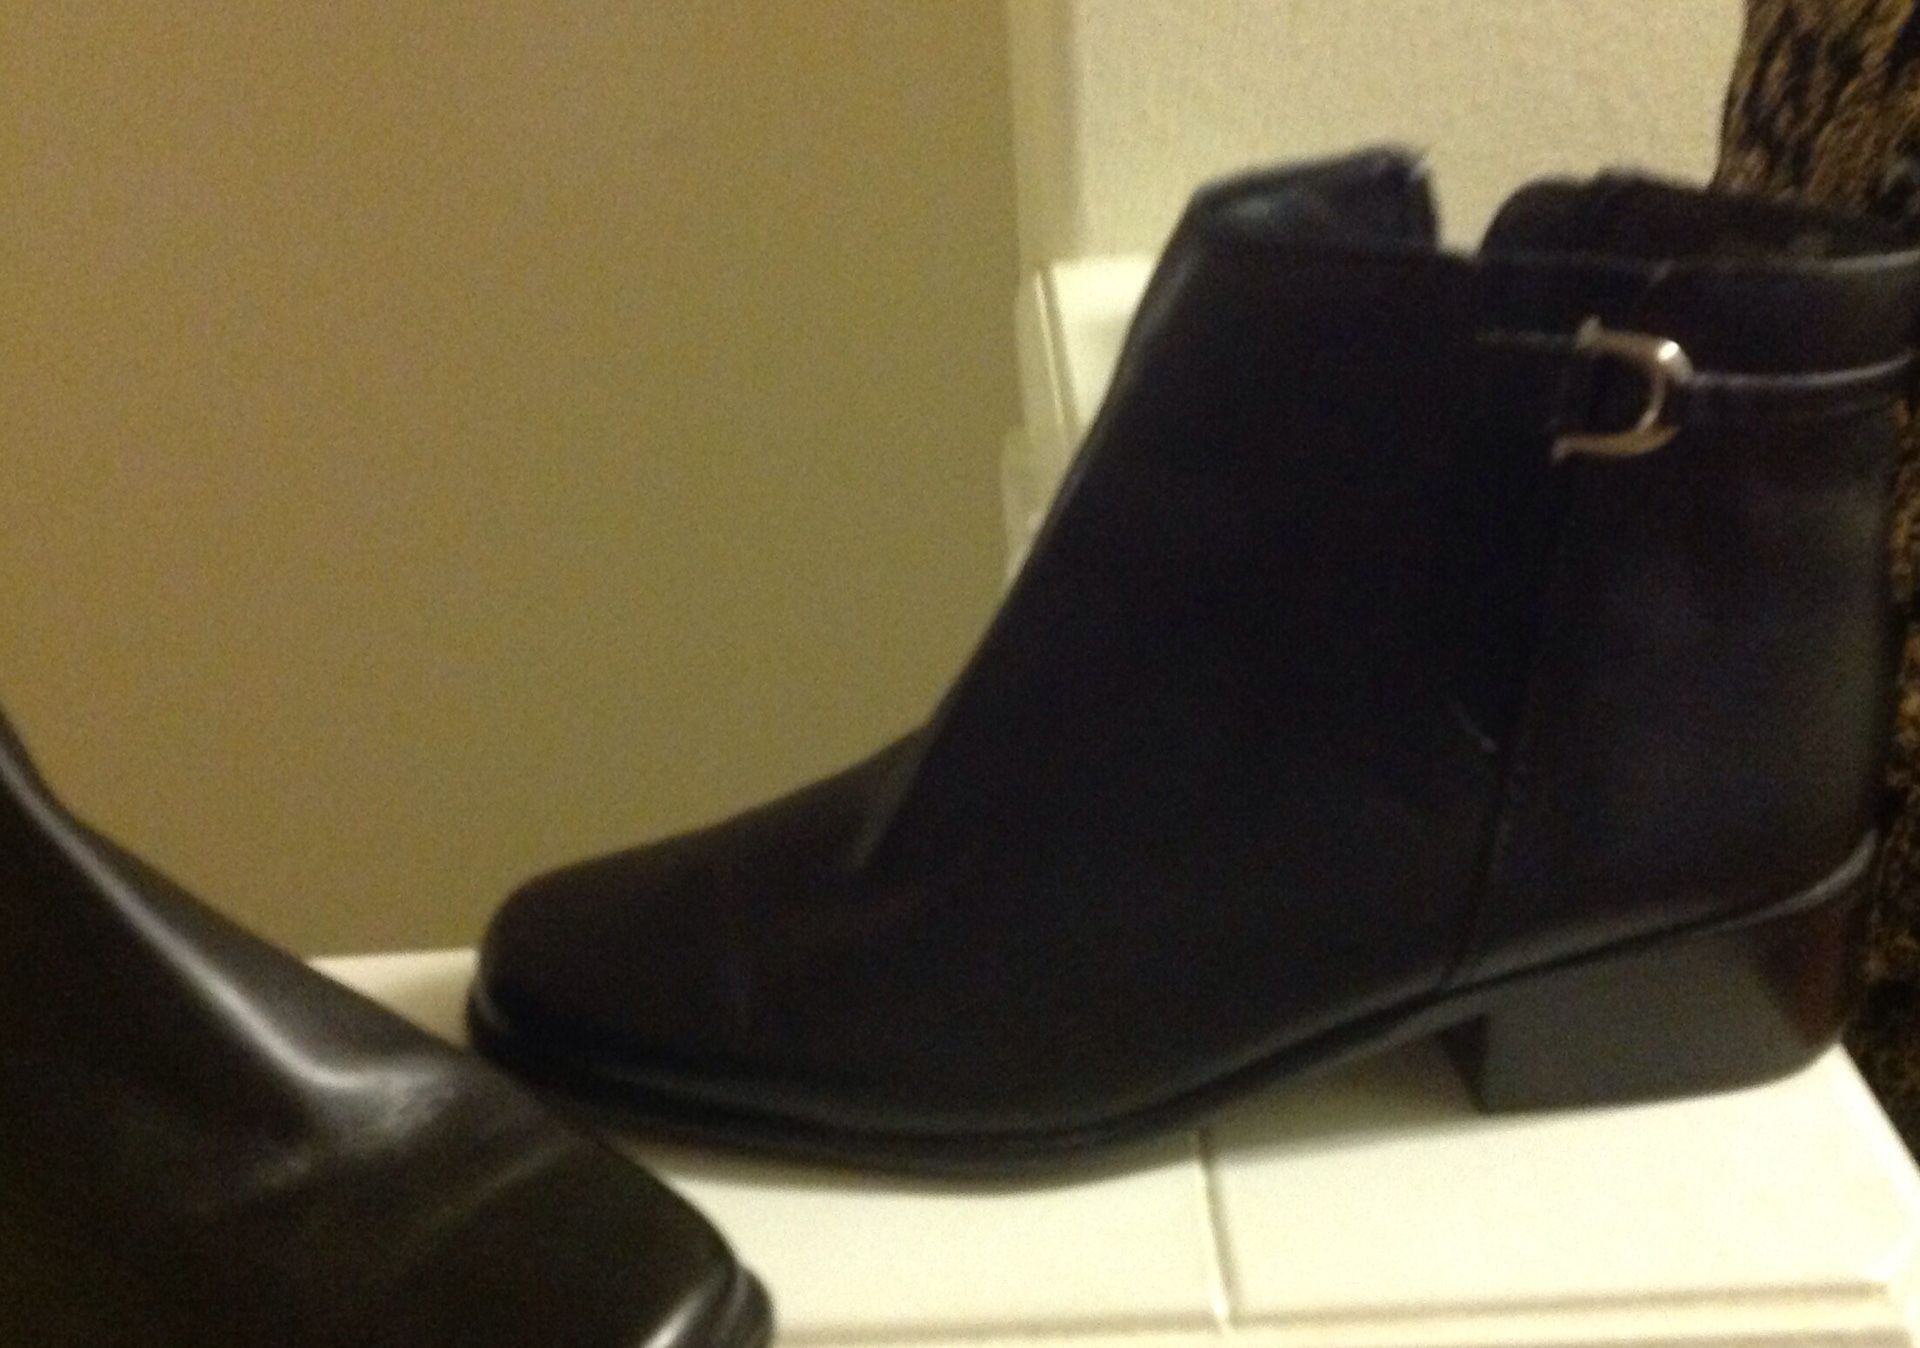 Covington real leather like new black 8.5 ankle boot